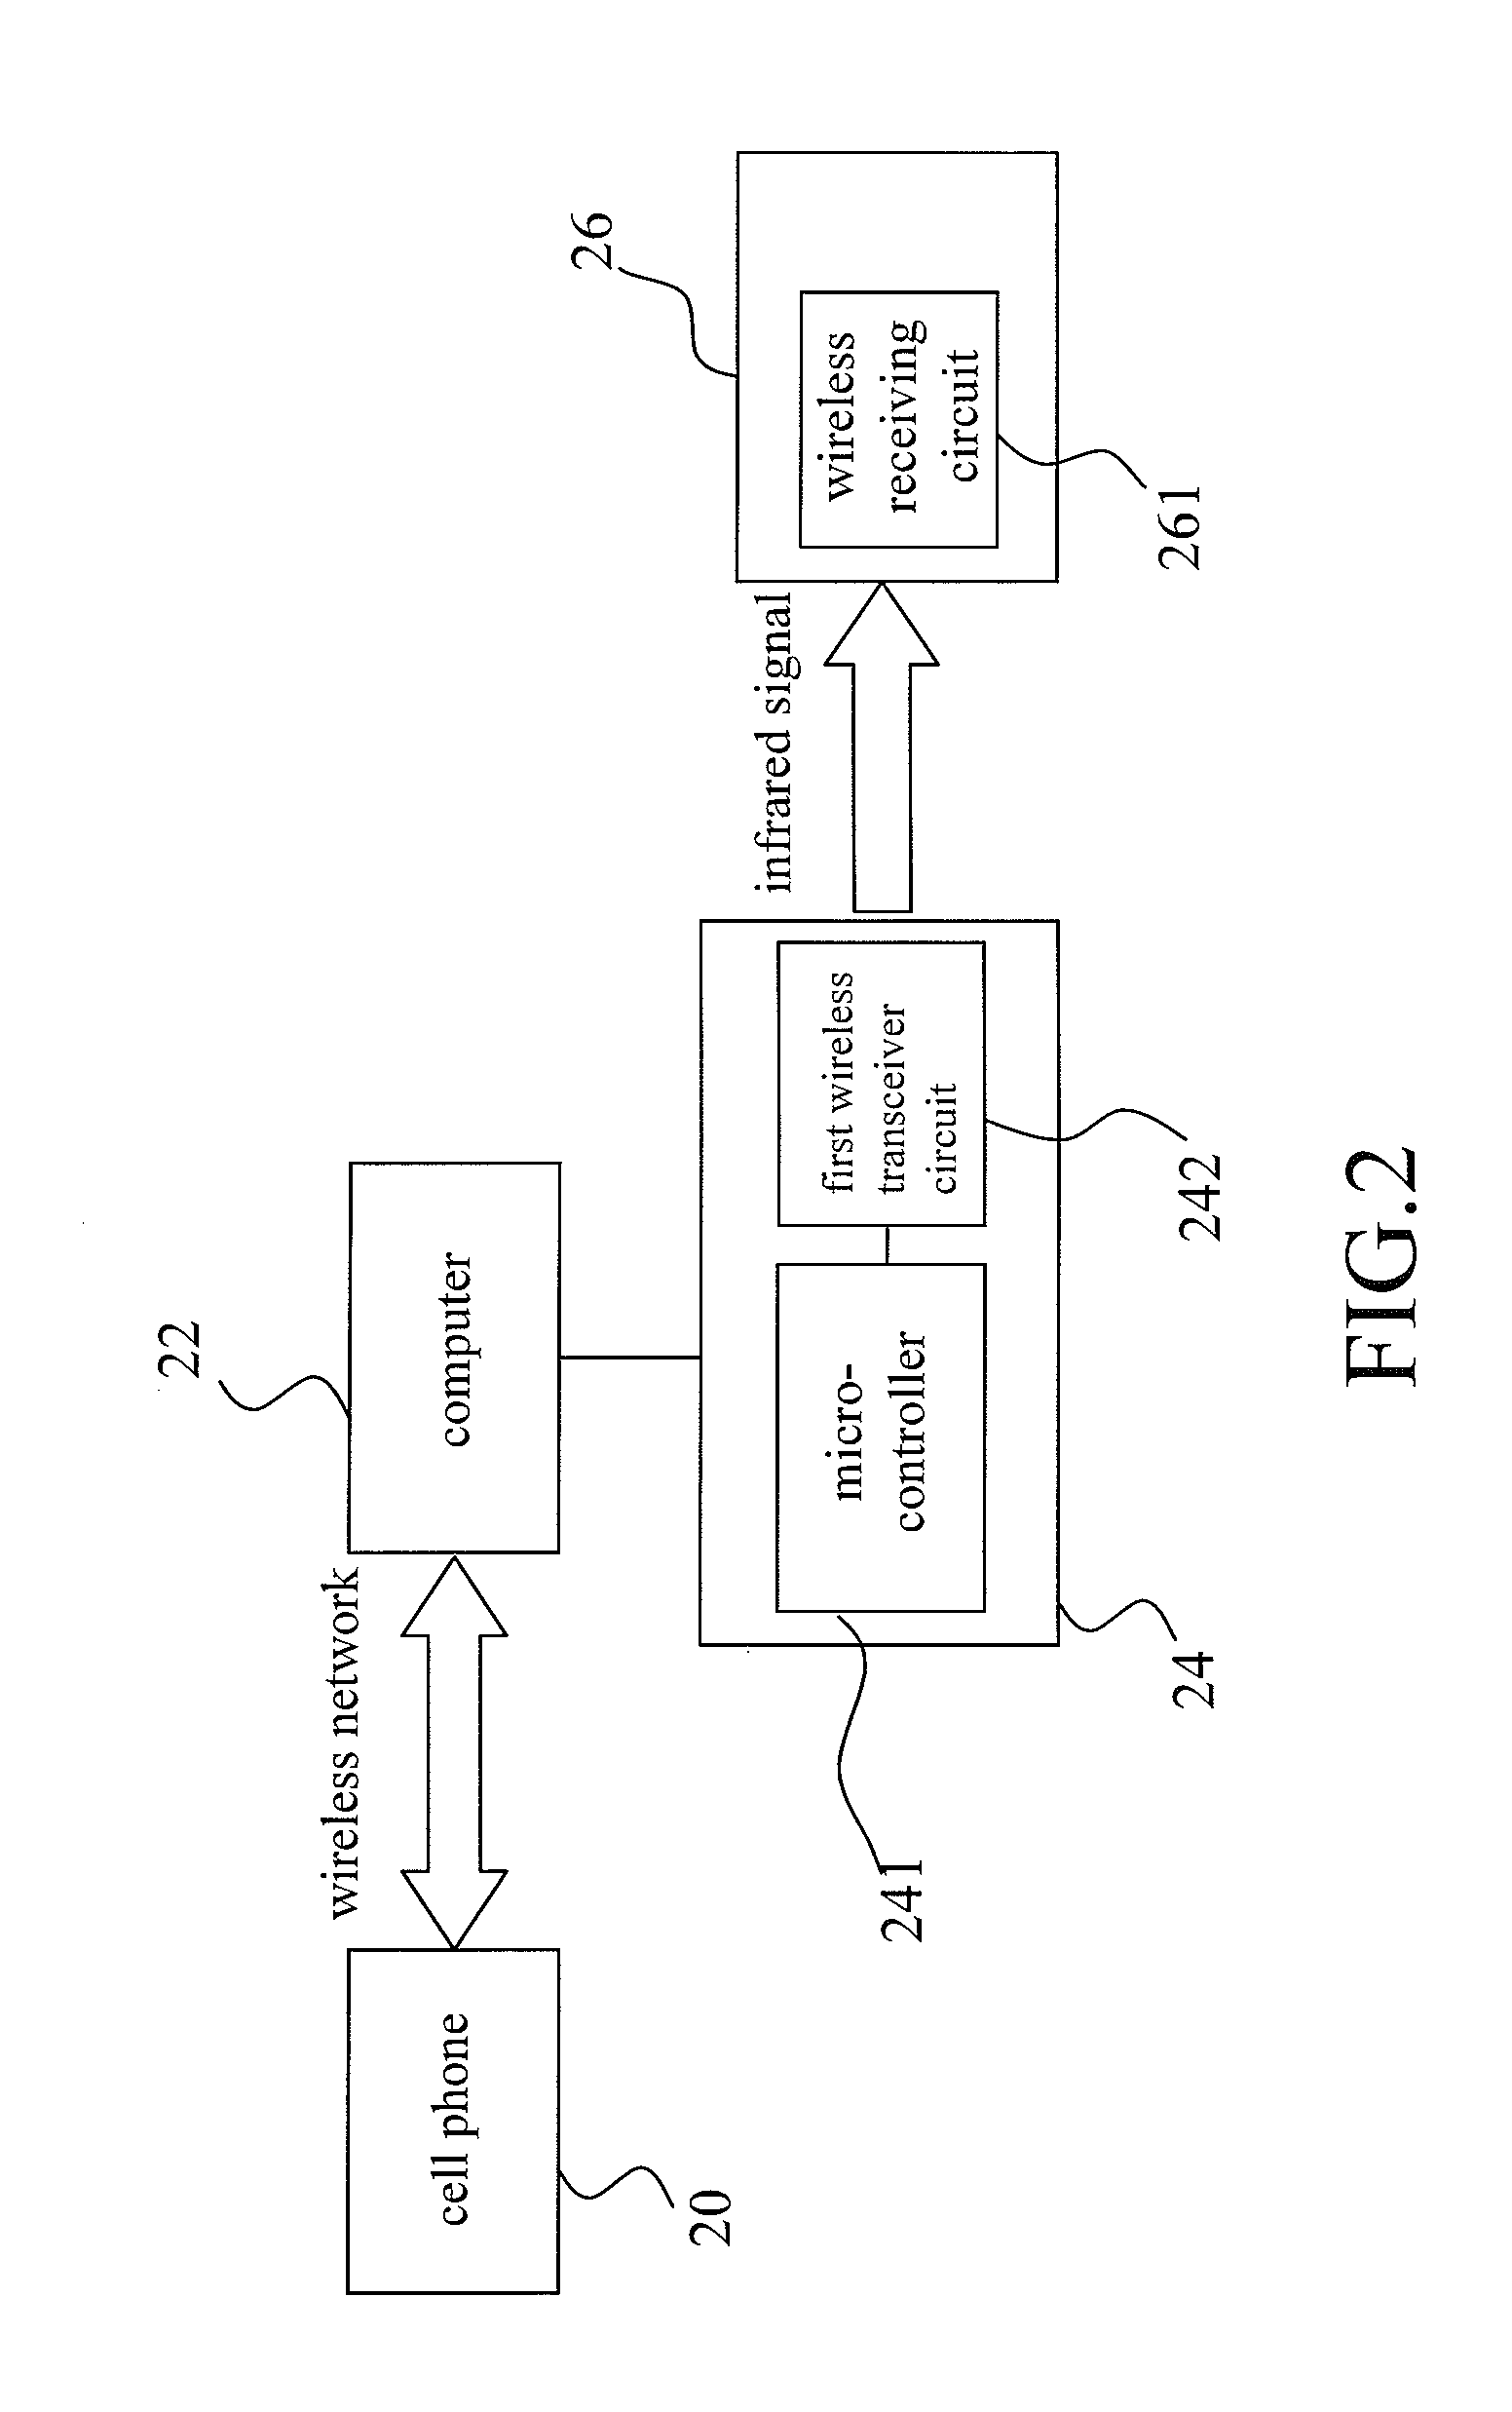 Integrated System for Remote Monitoring Home Appliances by Cell Phone